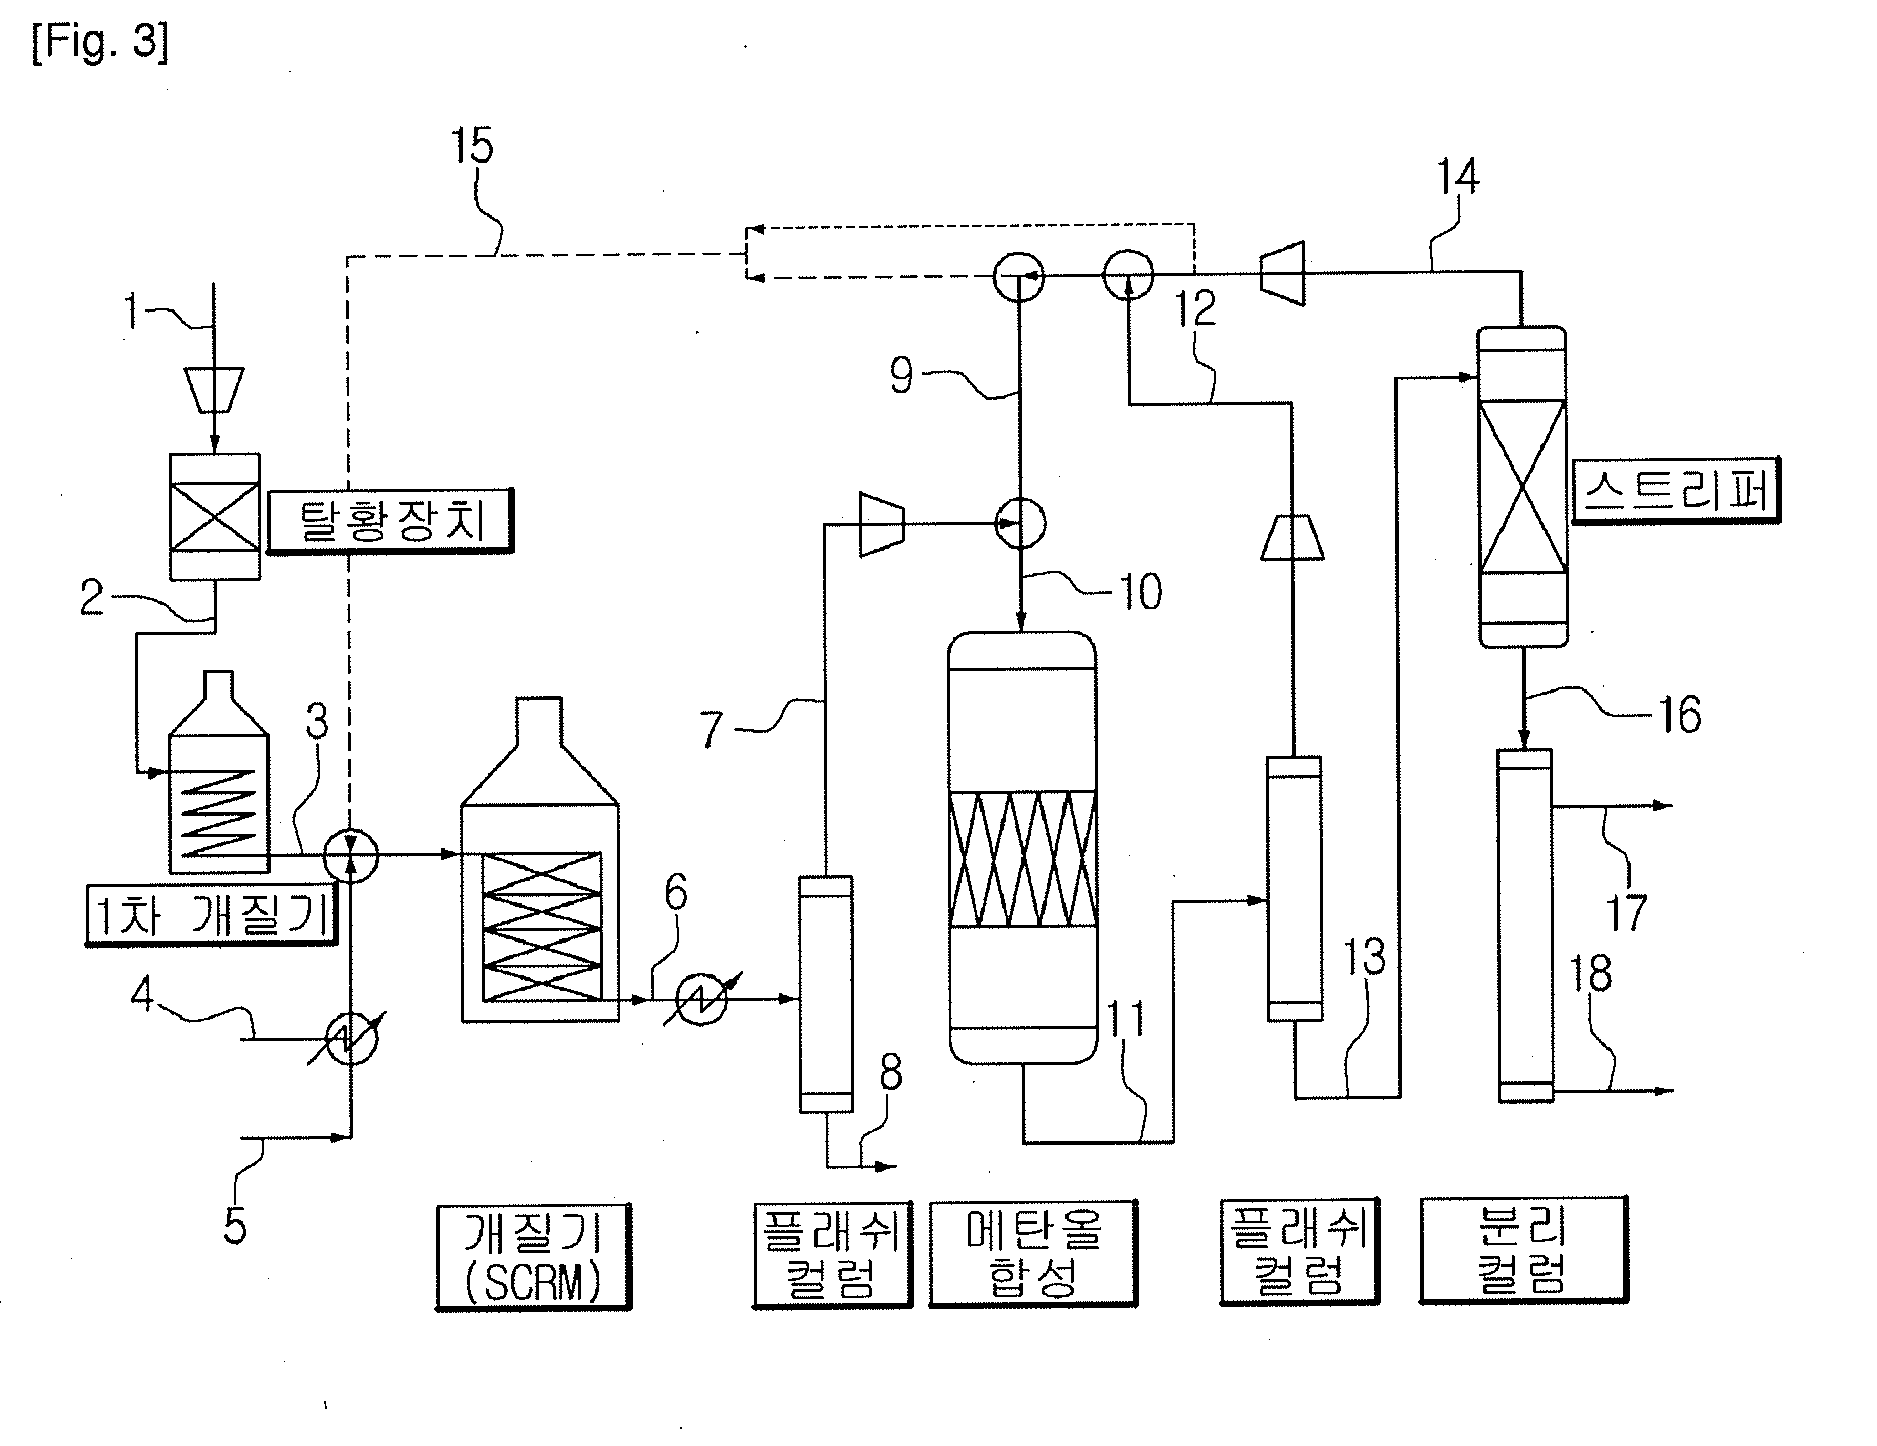 Method for methanol synthesis using synthesis gas generated by combined reforming of natural gas with carbon dioxide